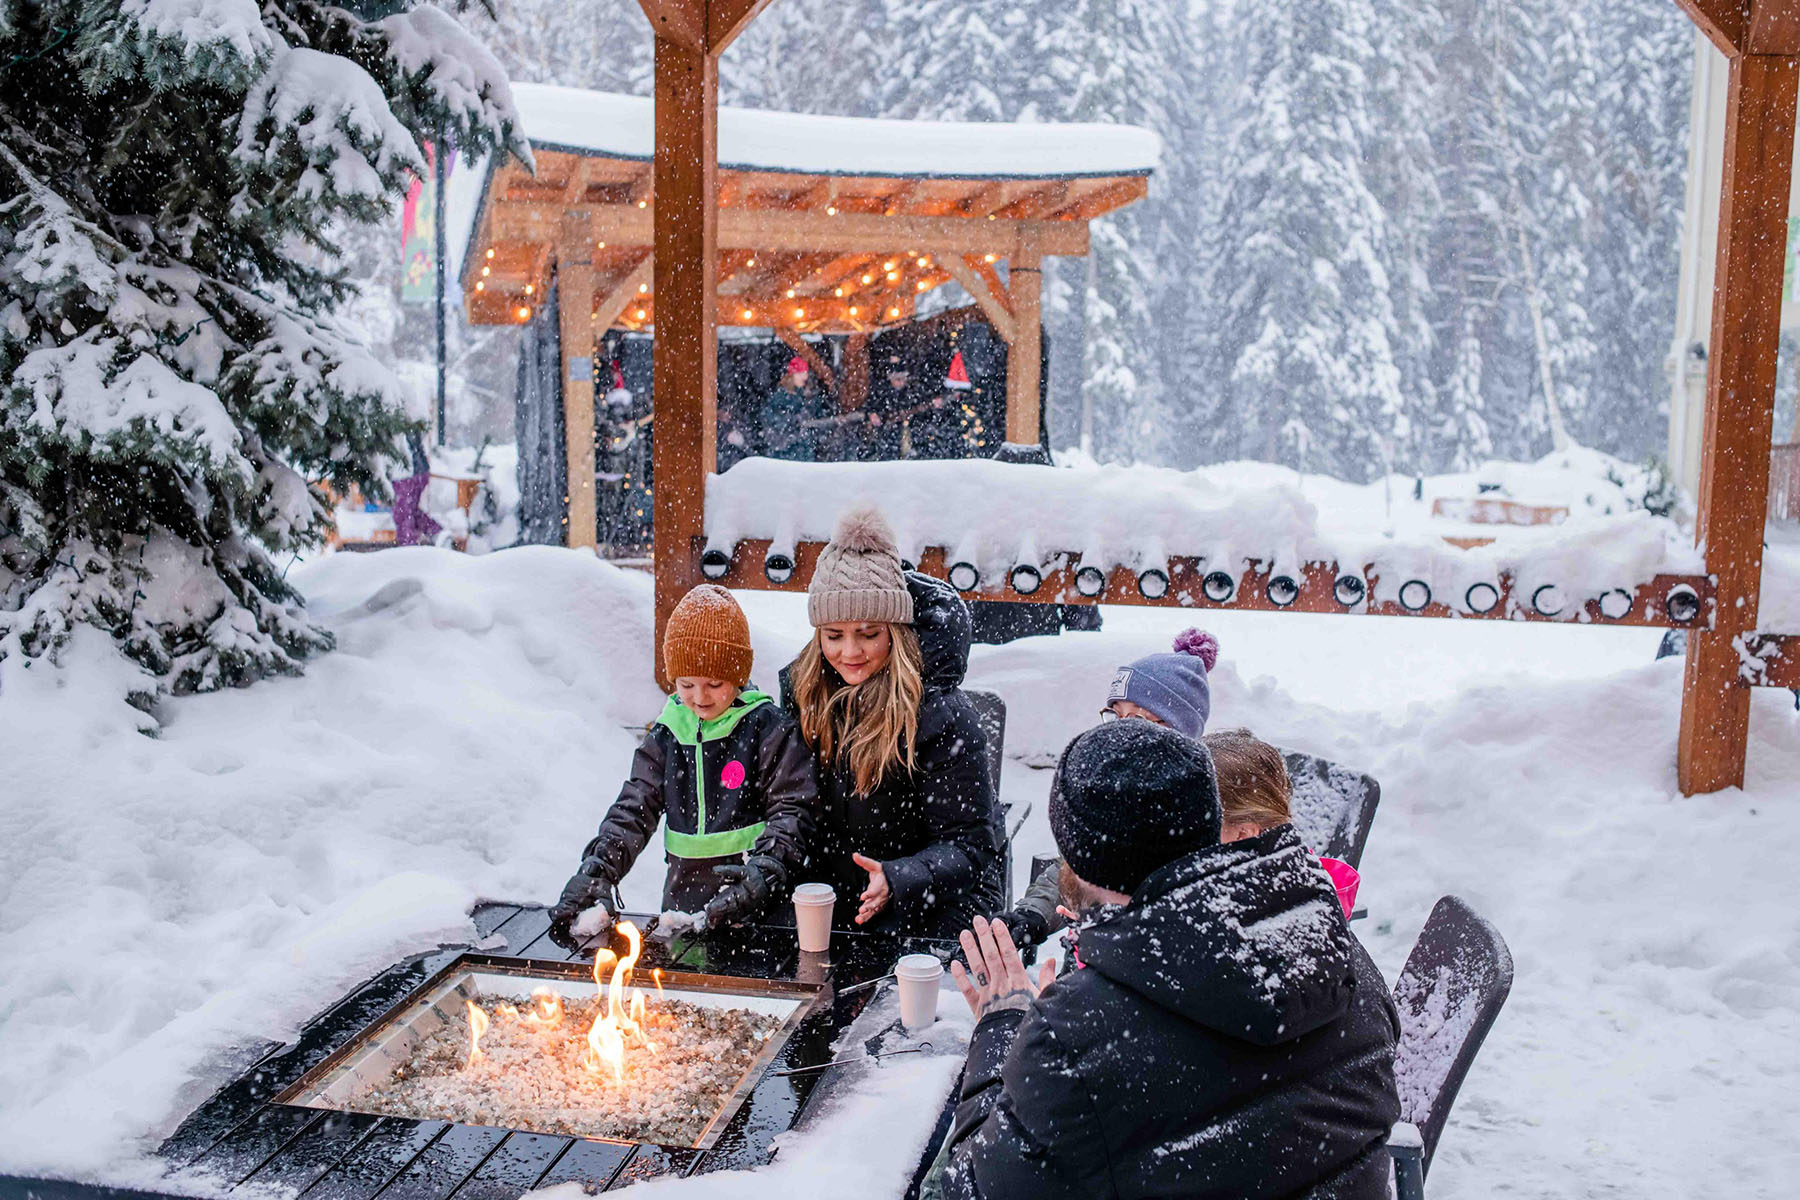 A family sitting around a firepit on a patio with snowfall around them